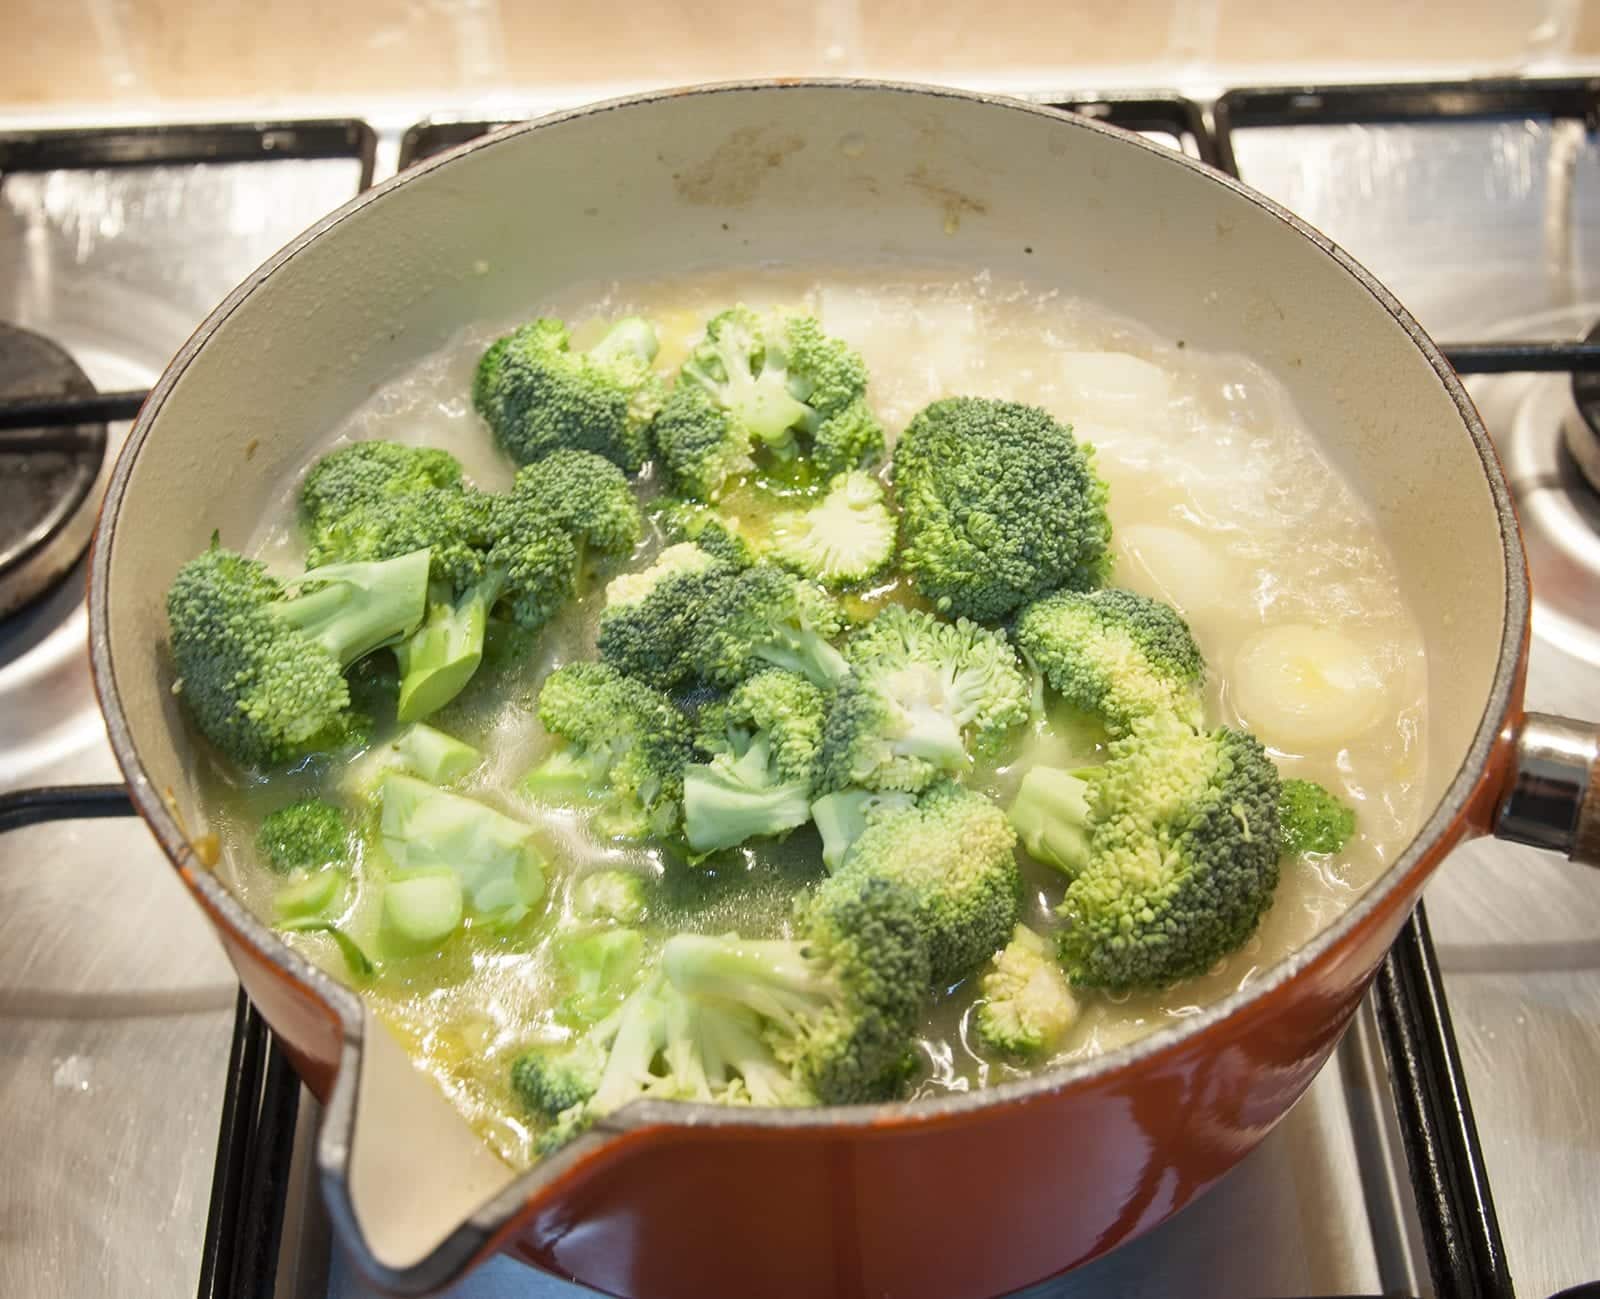 Classic broccoli and stilton soup. This is such a yummy soup recipe and so tasty. Healthy as well with all those veggies and a hint of creamy stilton. Yum! | theyumyumclub.com